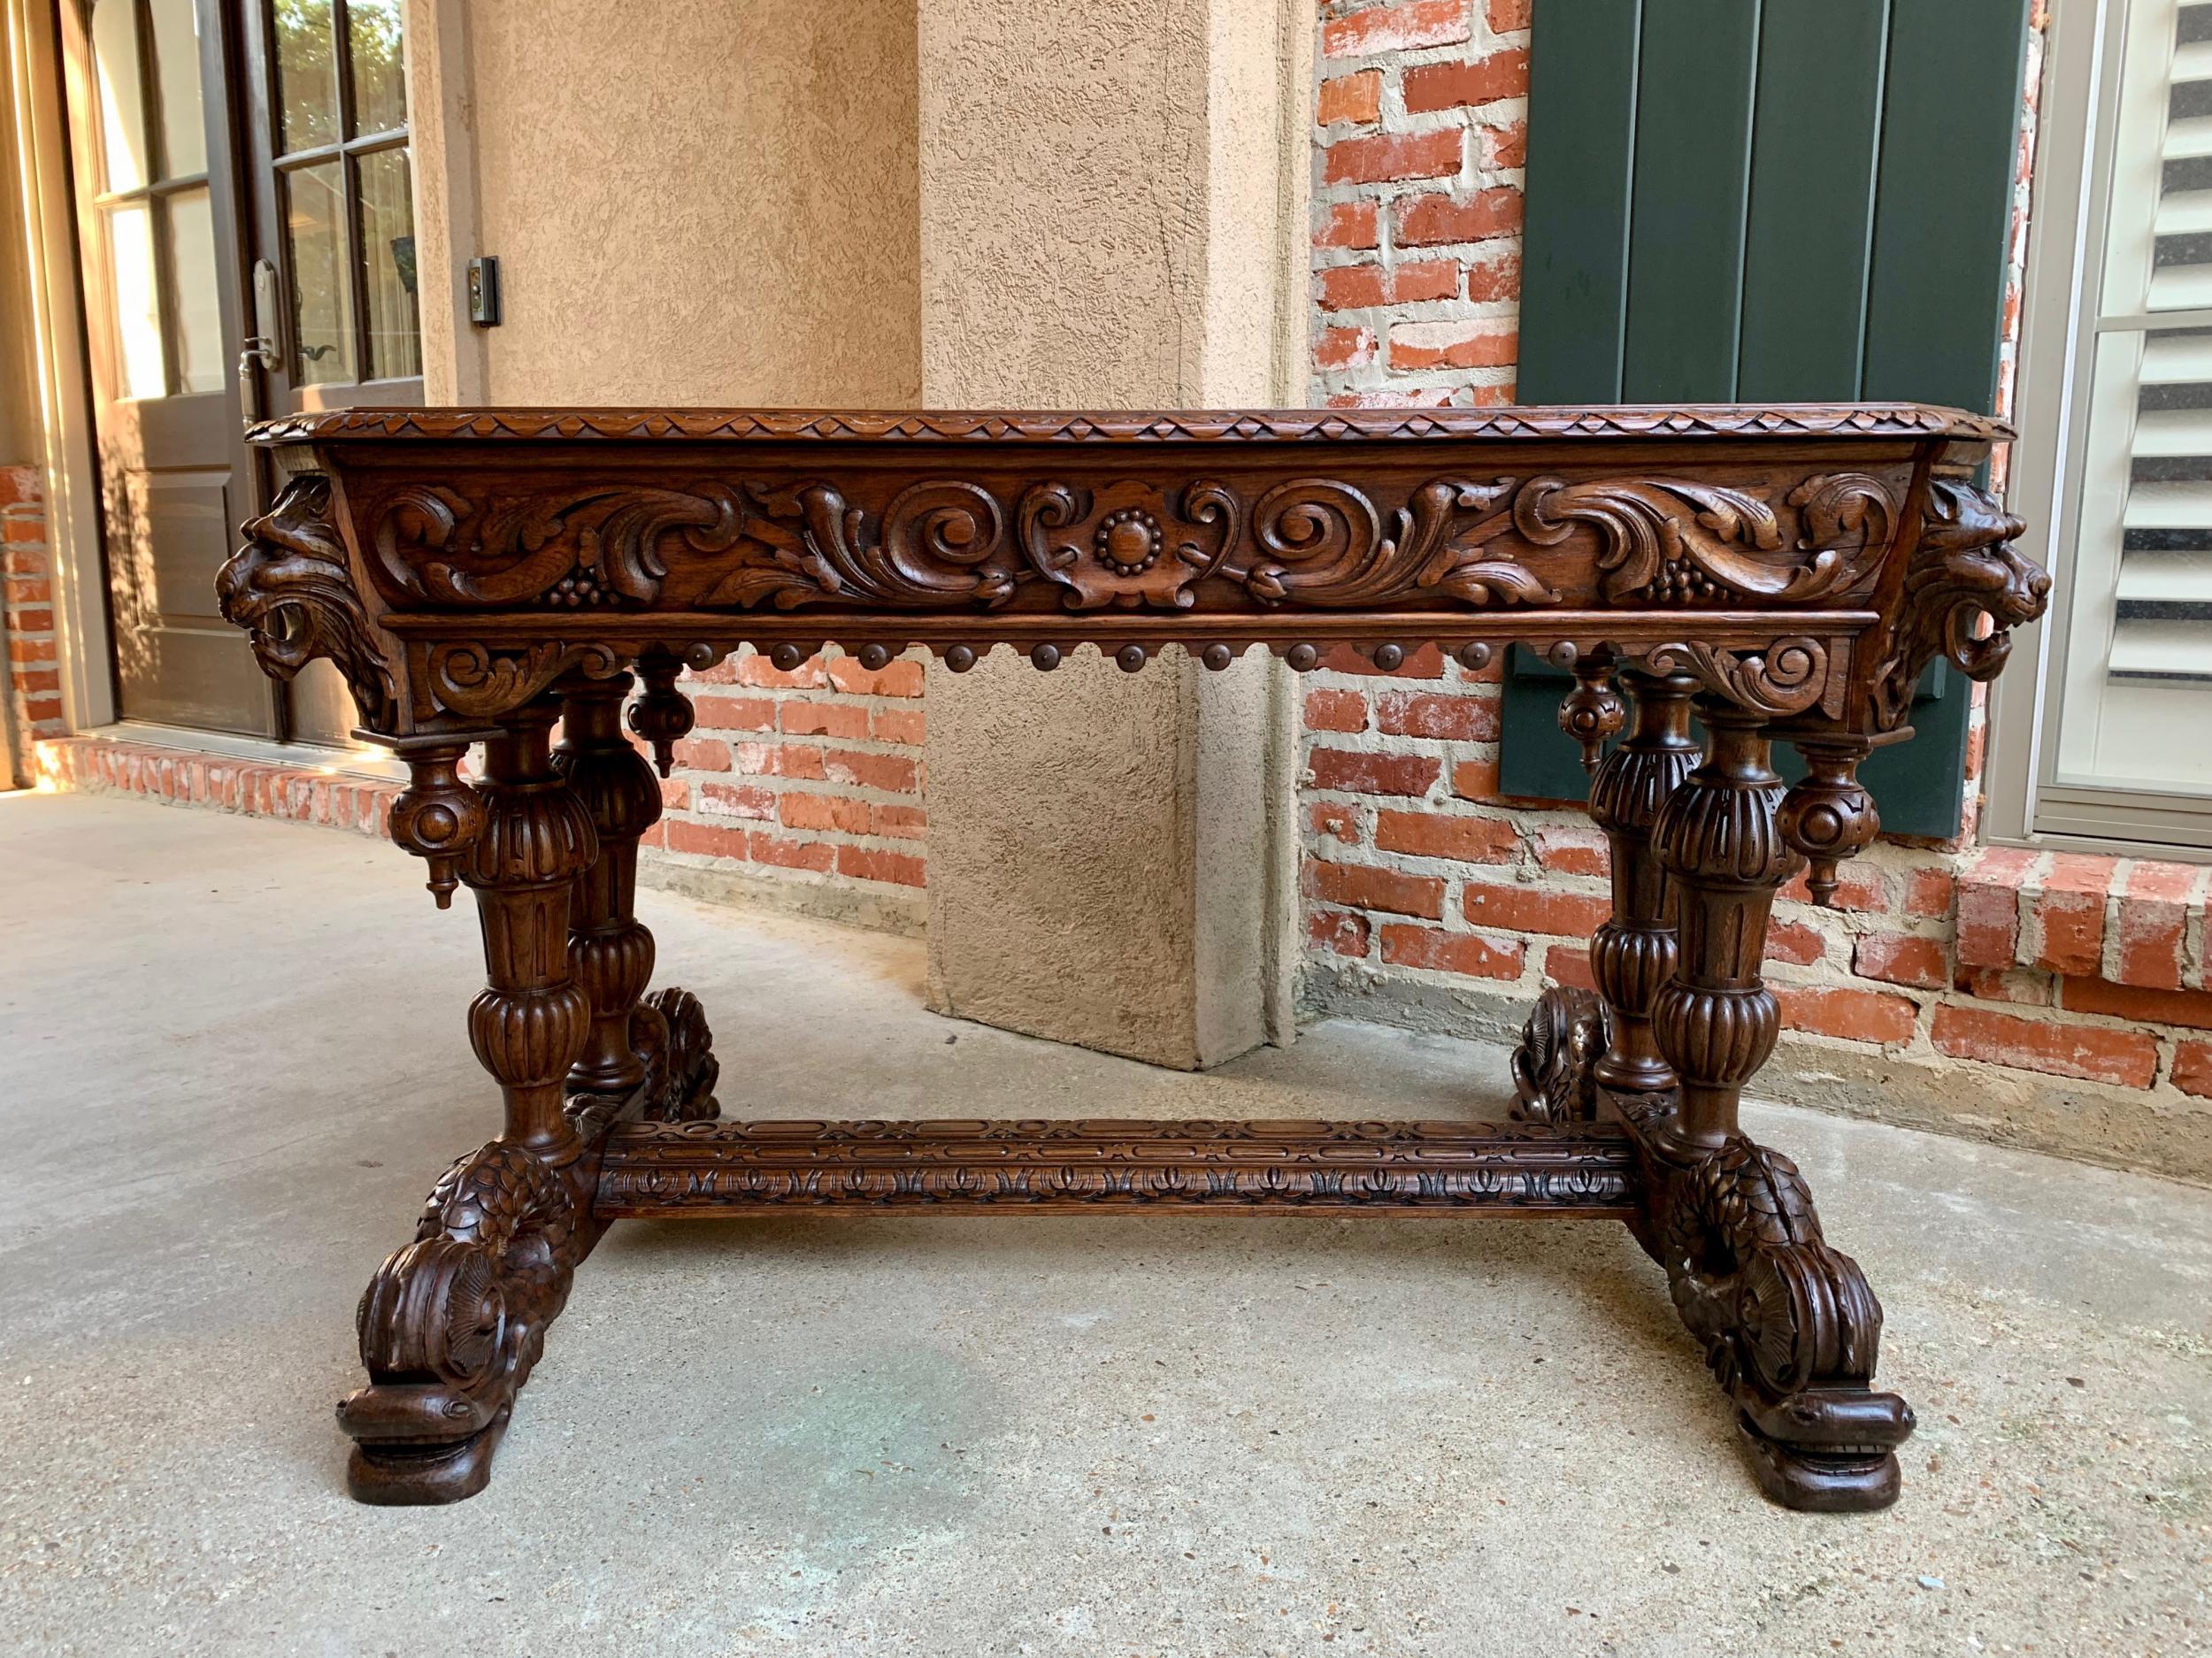 19th century French carved oak desk sofa side table dolphin Renaissance Gothic

~Direct from France~
~An elegant antique French carved oak library table or “bureau plat” desk, commonly referred to as a ‘dolphin’ table, so called for the ornately